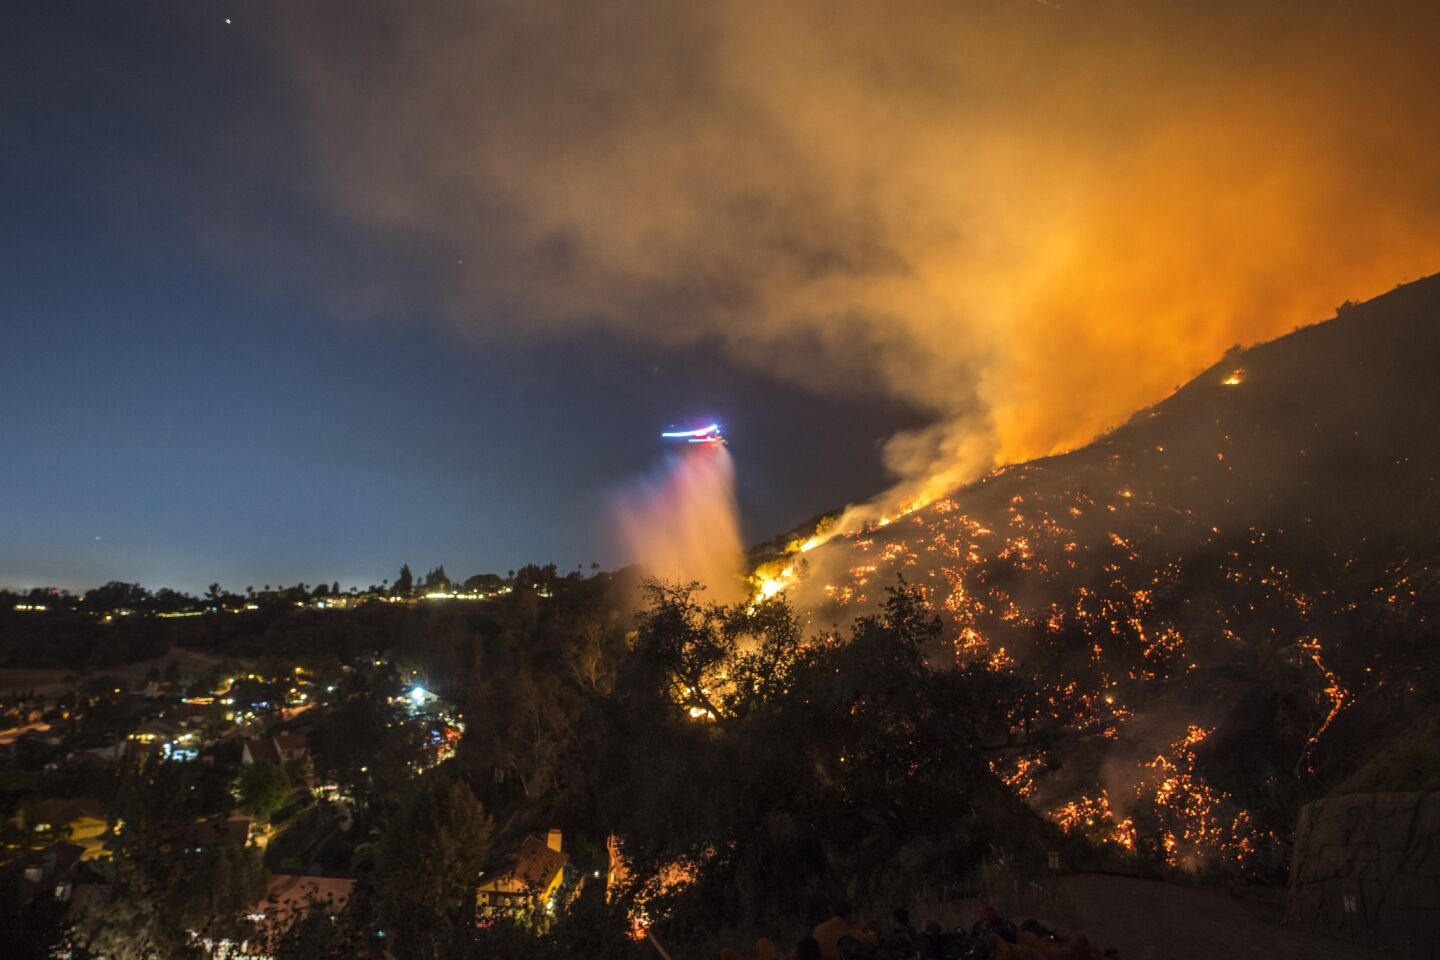 The Fish fire burns near homes in Bradbury on Monday evening as a Los Angeles County fire helicopter makes a nighttime water drop in a long-exposure image.